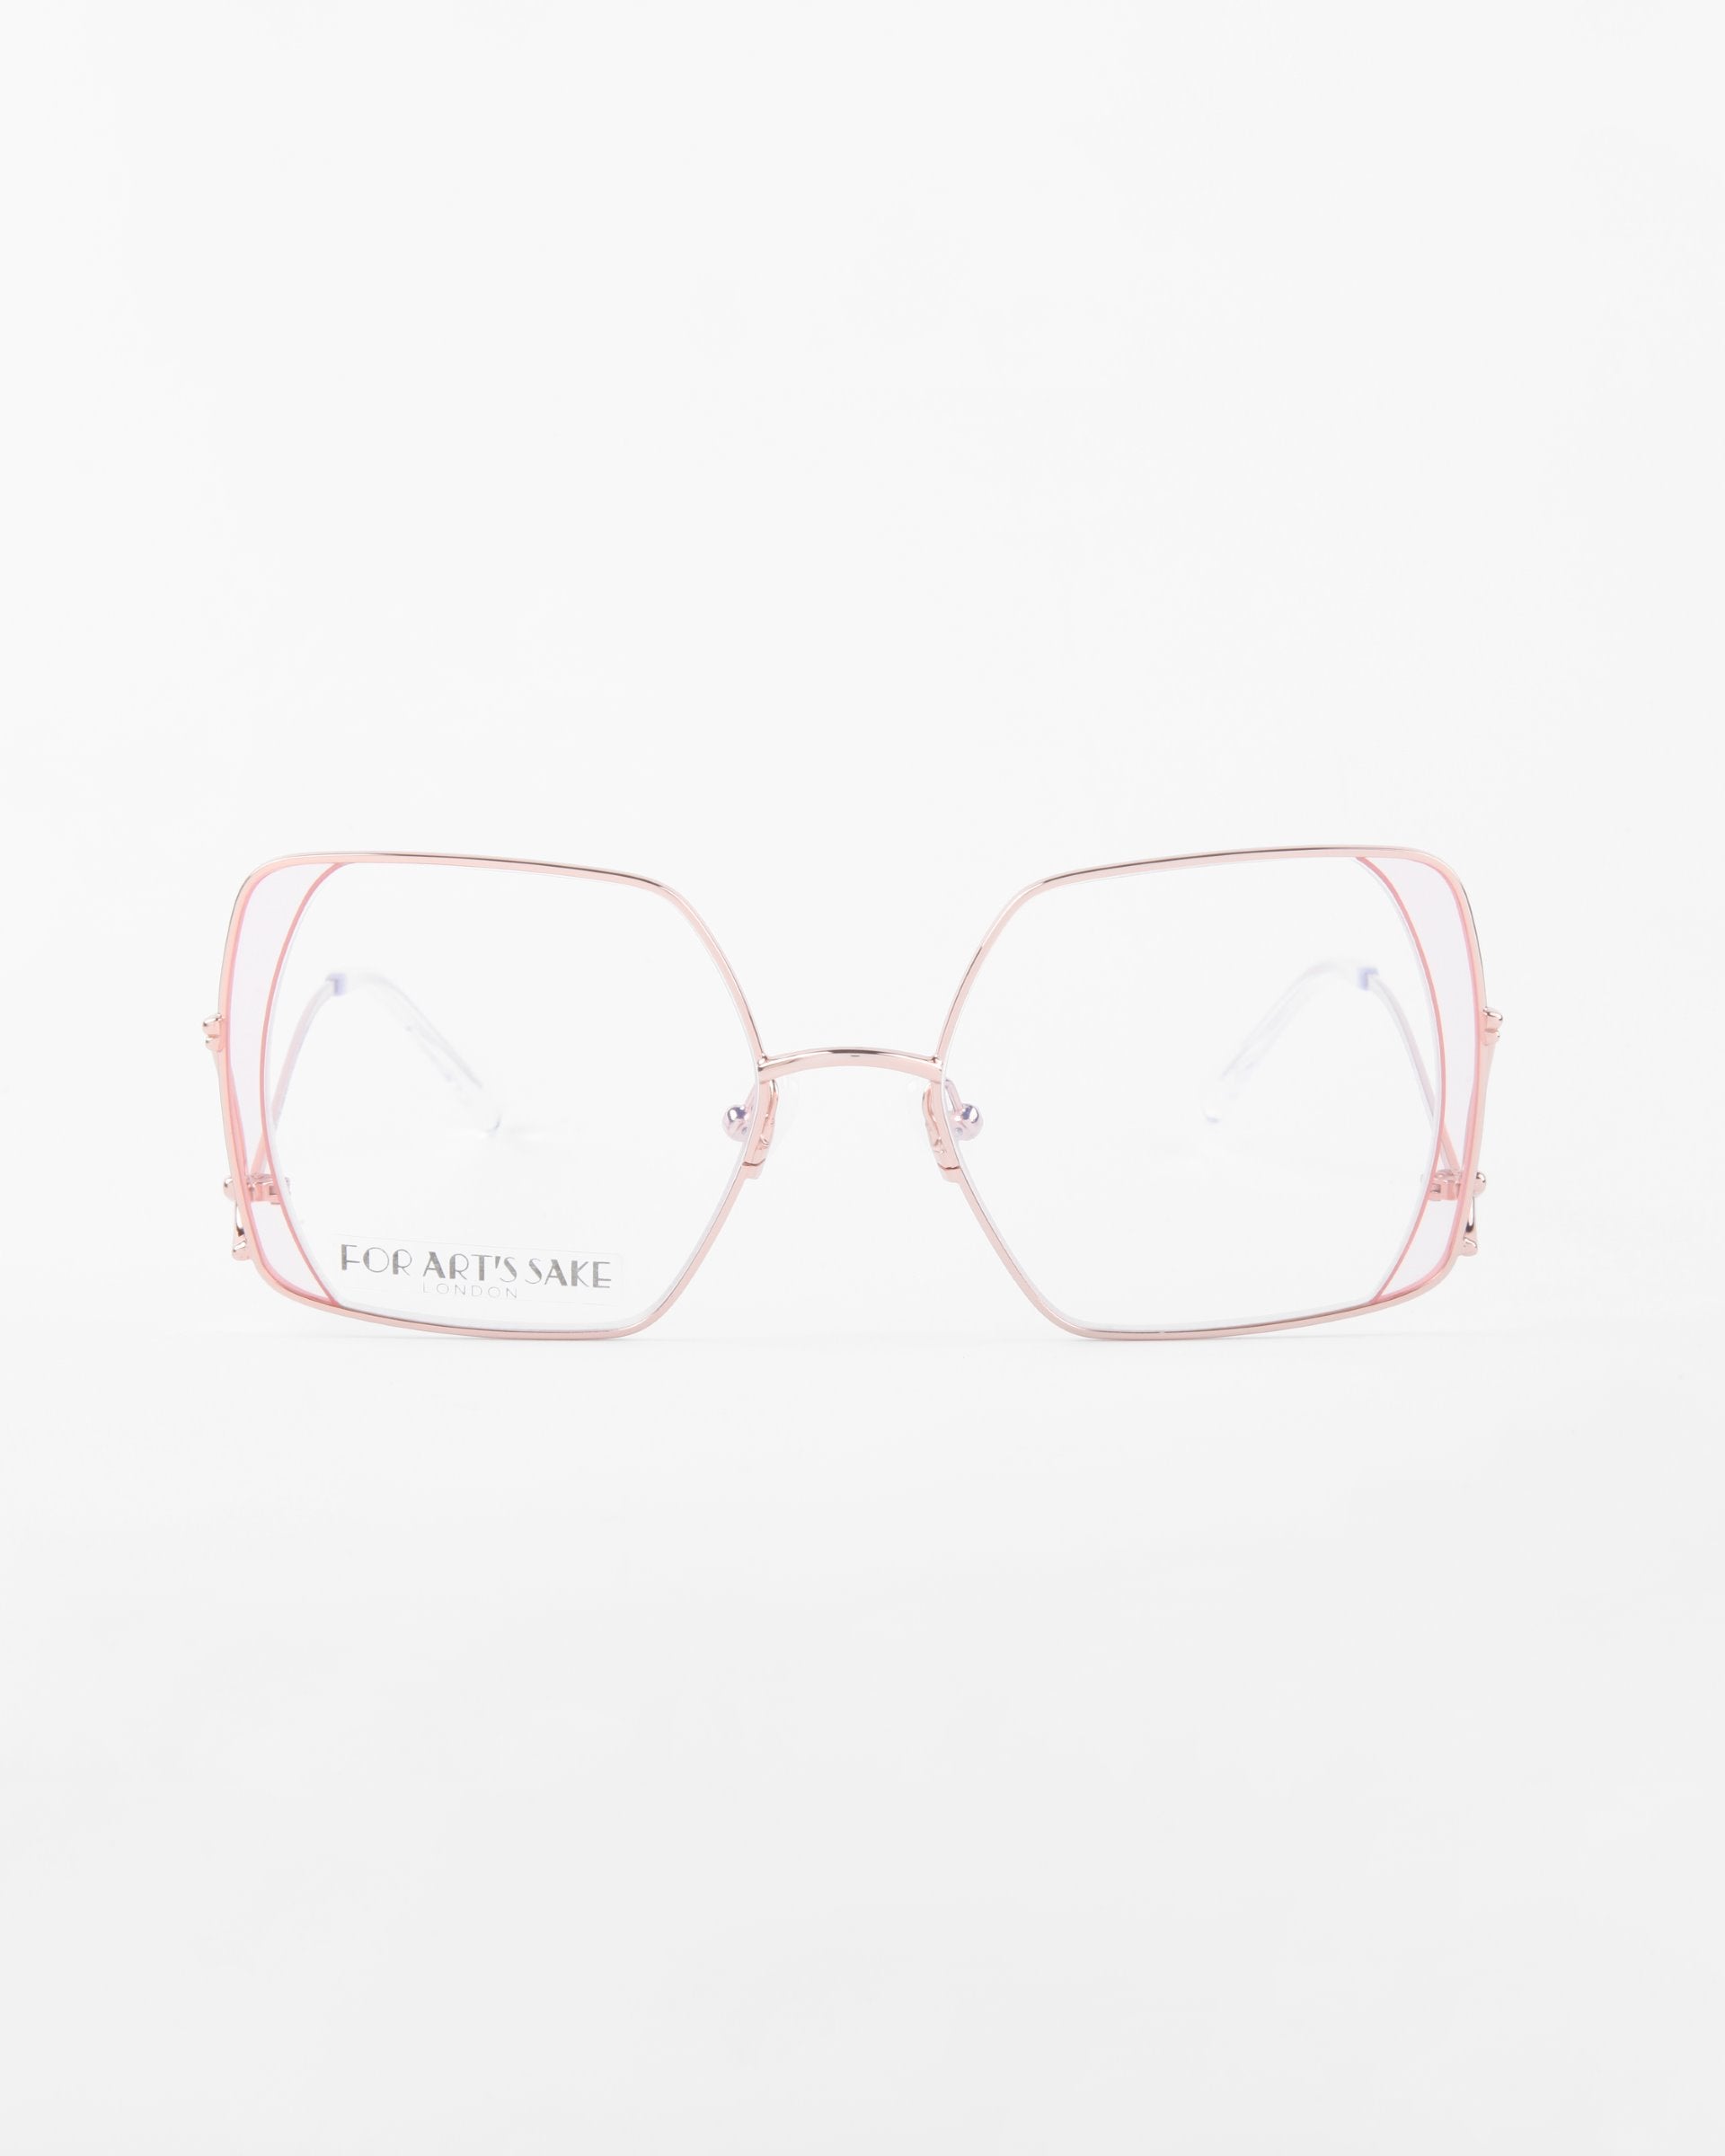 A pair of oversized eyeglasses featuring square-shaped lenses with a double frame design. The outer frame is made of thin, pink stainless steel, creating a modern and stylish look. The clear lenses are centered, and the background is plain white. These eyeglasses are called Candy by For Art&#39;s Sake®.